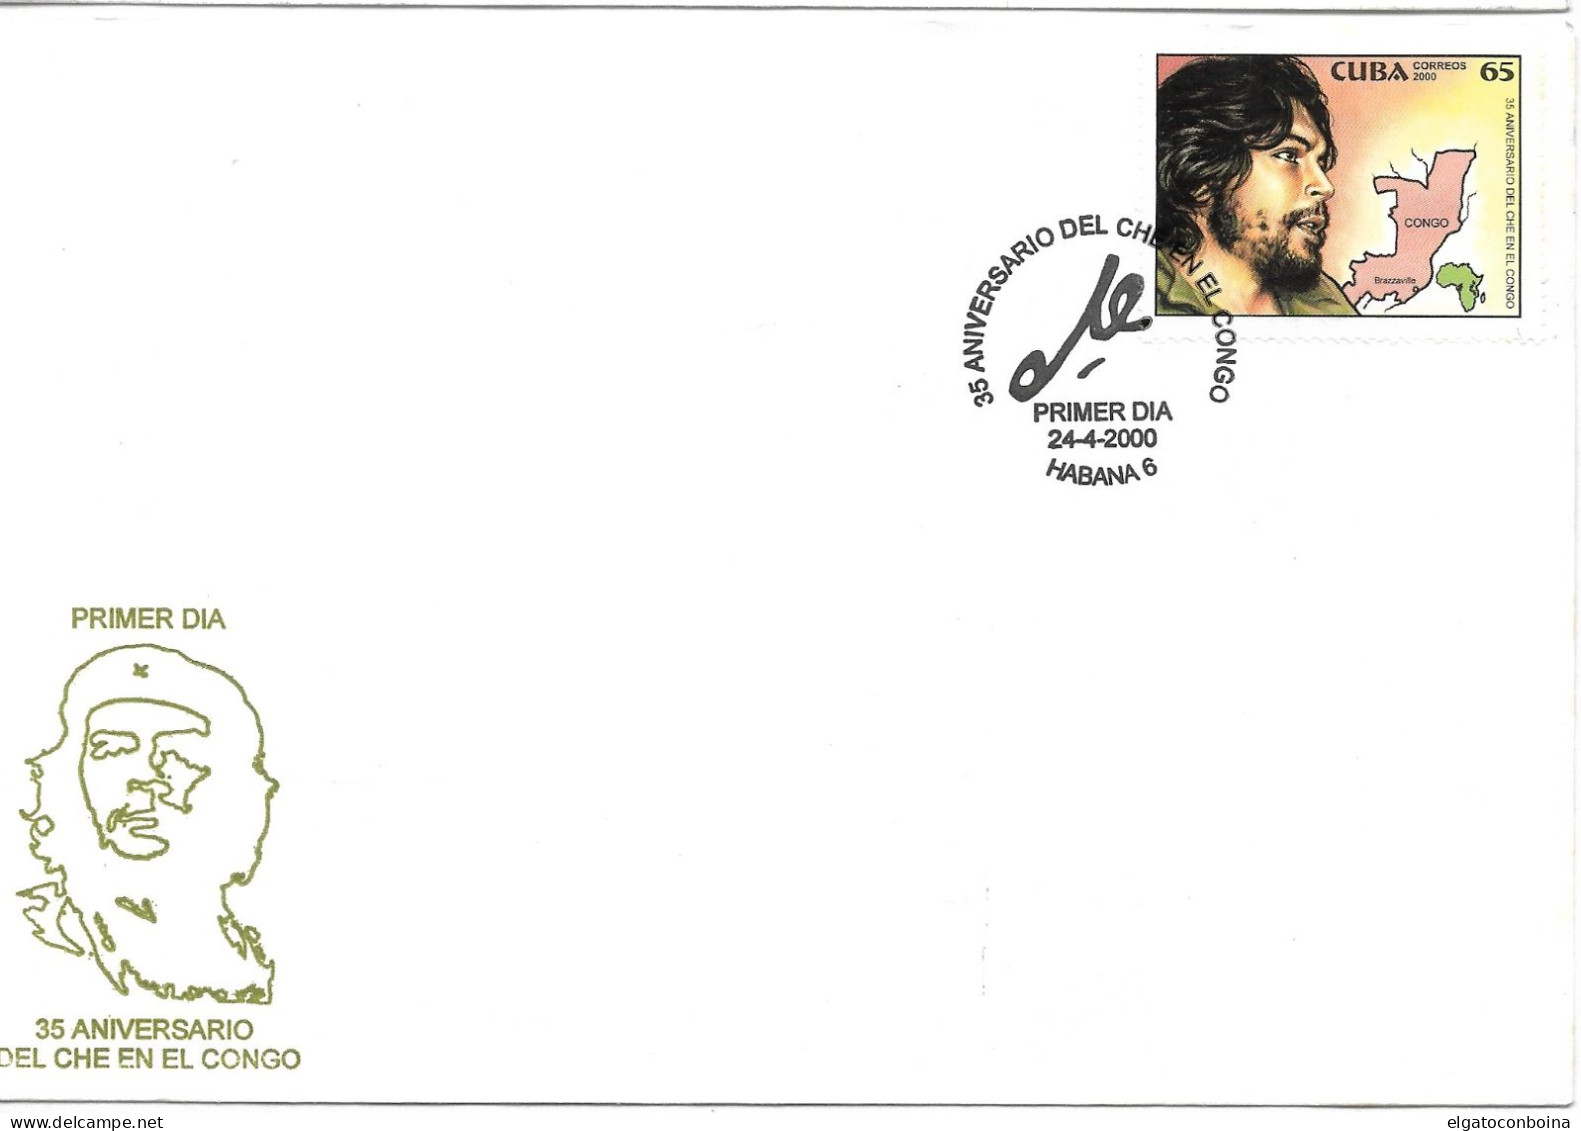 CUBA 2000 ERNESTO CHE GUEVARA ANNIVERSARY POLITICIAN MAPS FIRST DAY COVER WITH SPECIAL CANCEL - FDC